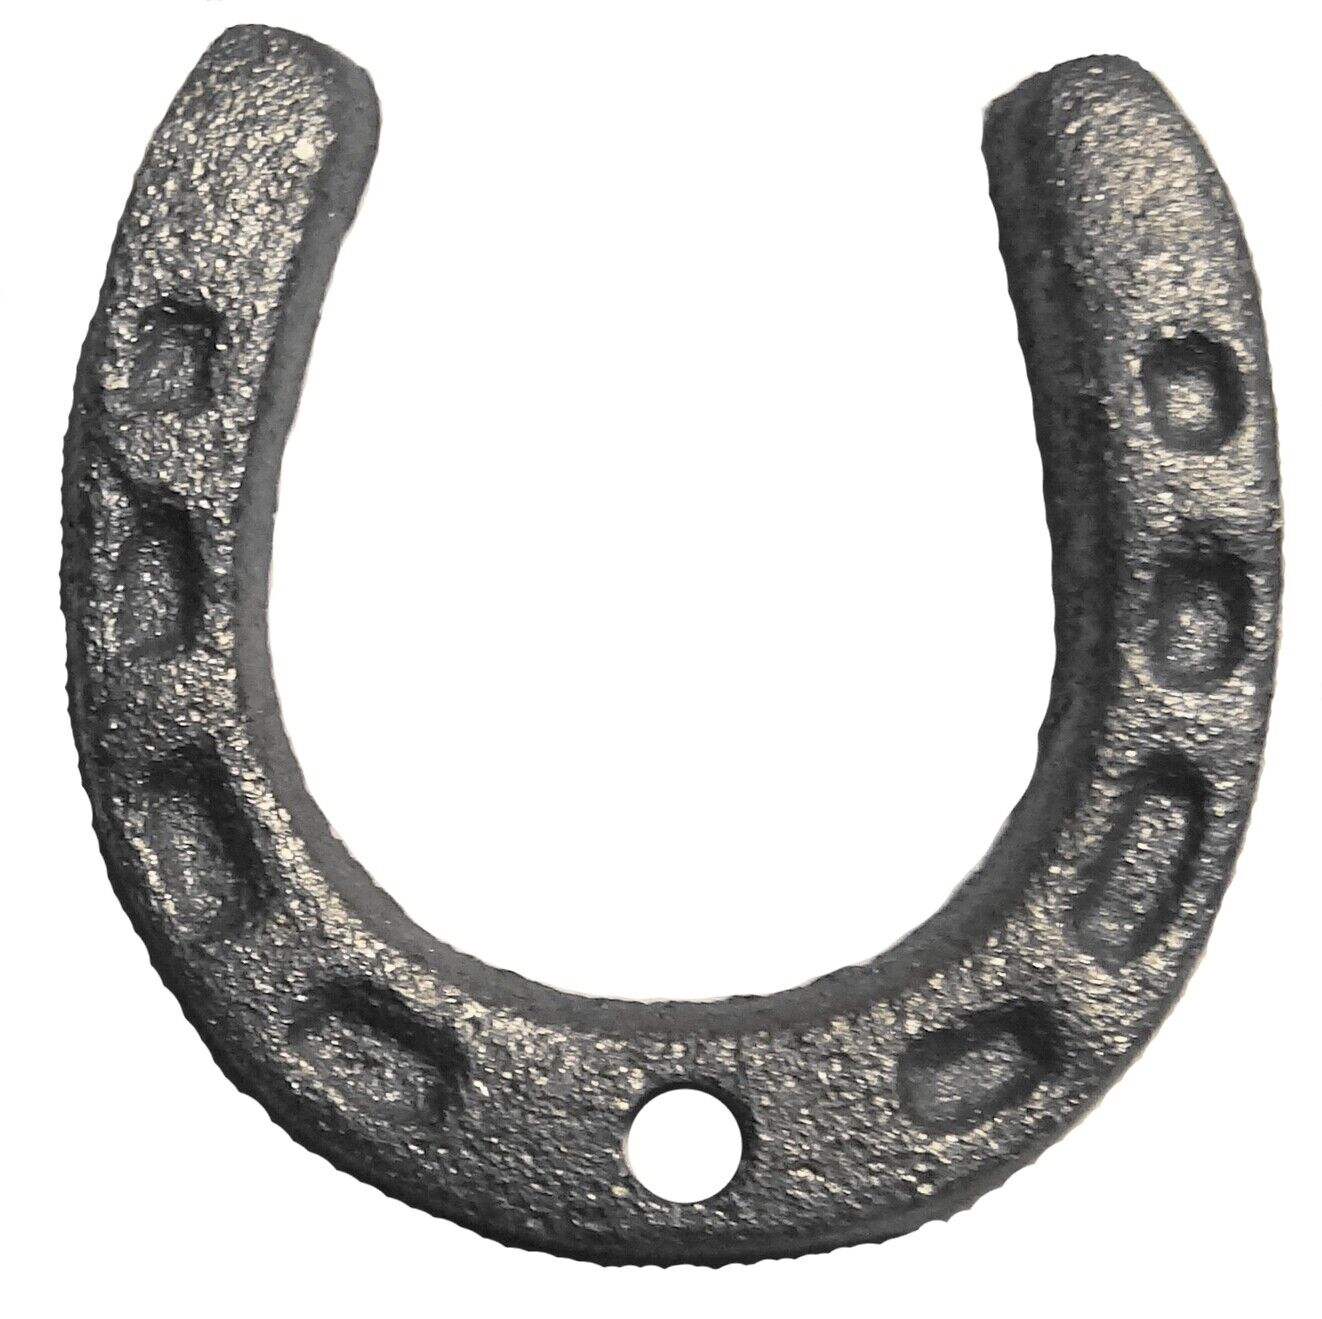 2pc Lot Tiny Cast Iron Horseshoes Crafts Party Favors Weddings or Good Luck